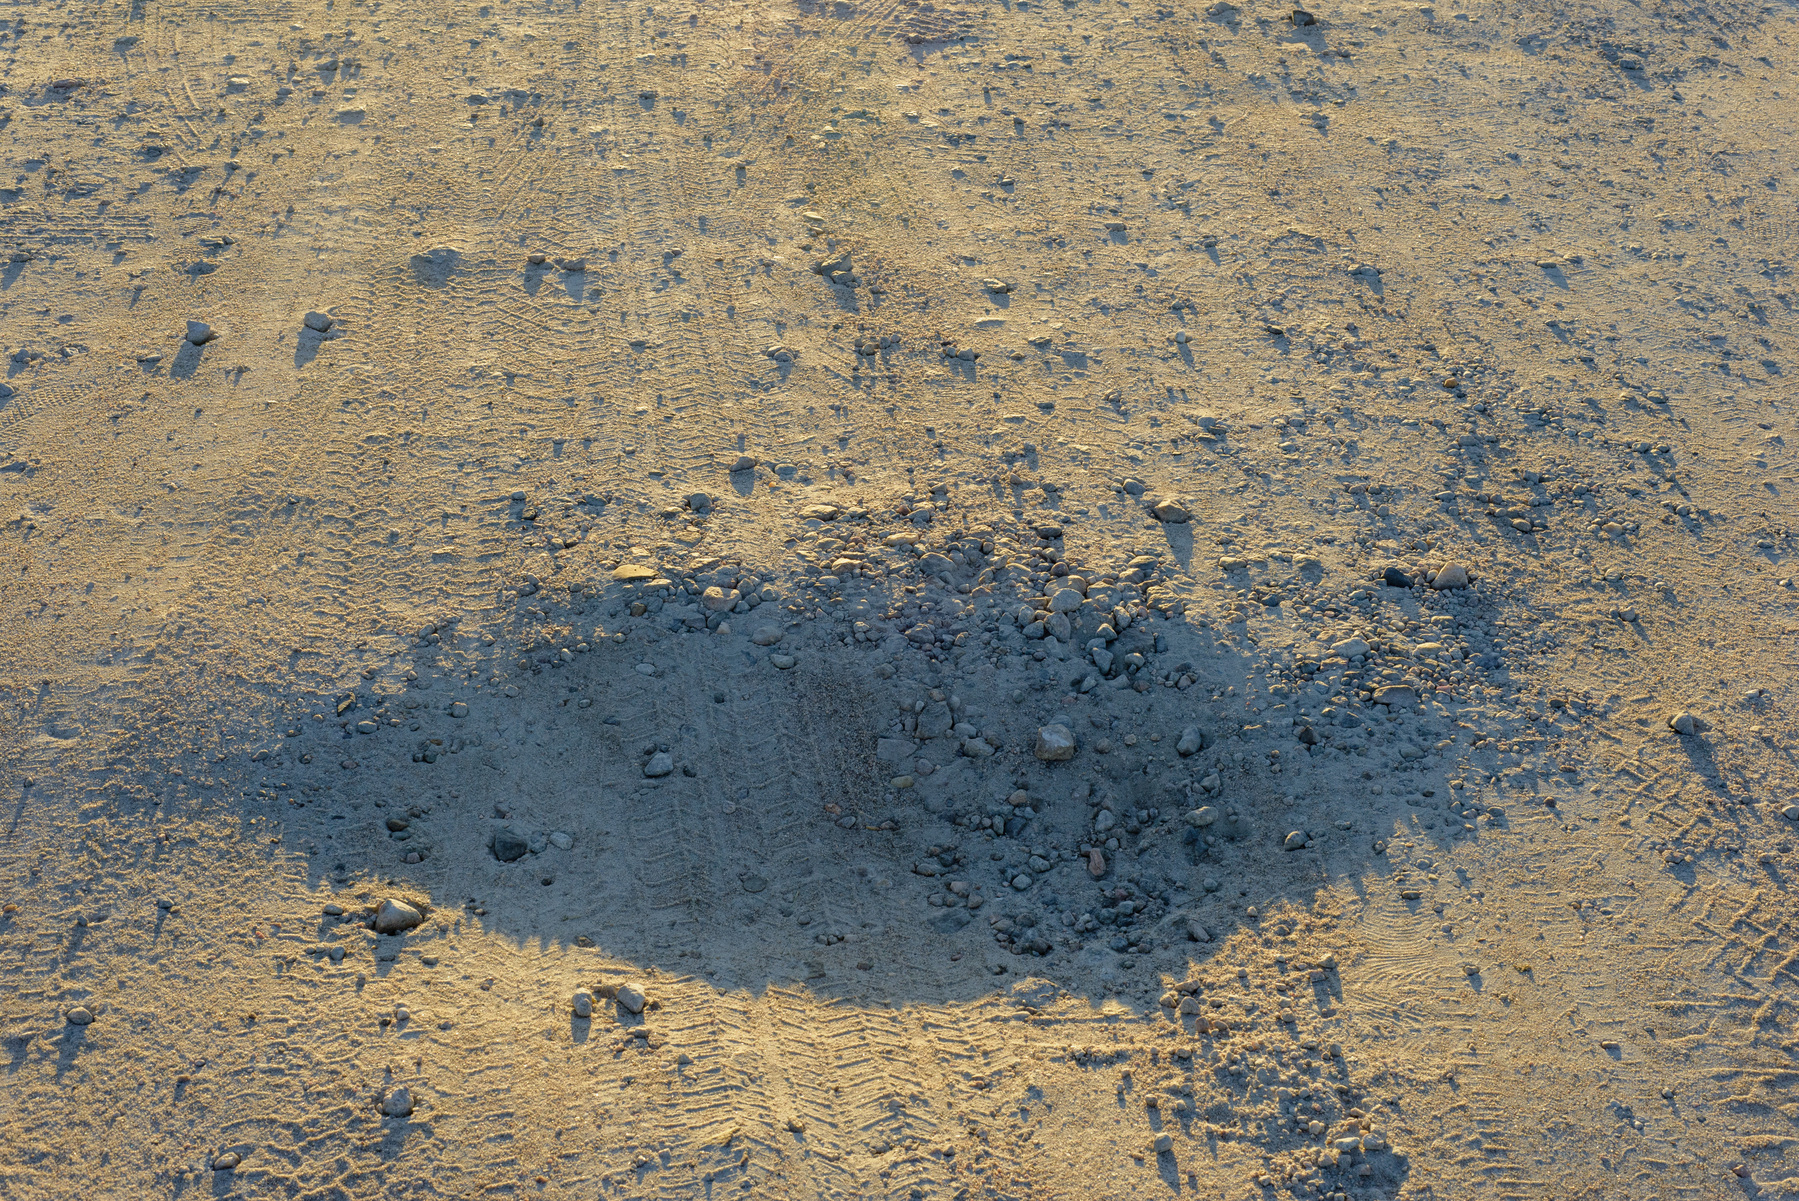 Crater in a parking lot with low angle sun casting a shadow across most of the bowl of the crater.